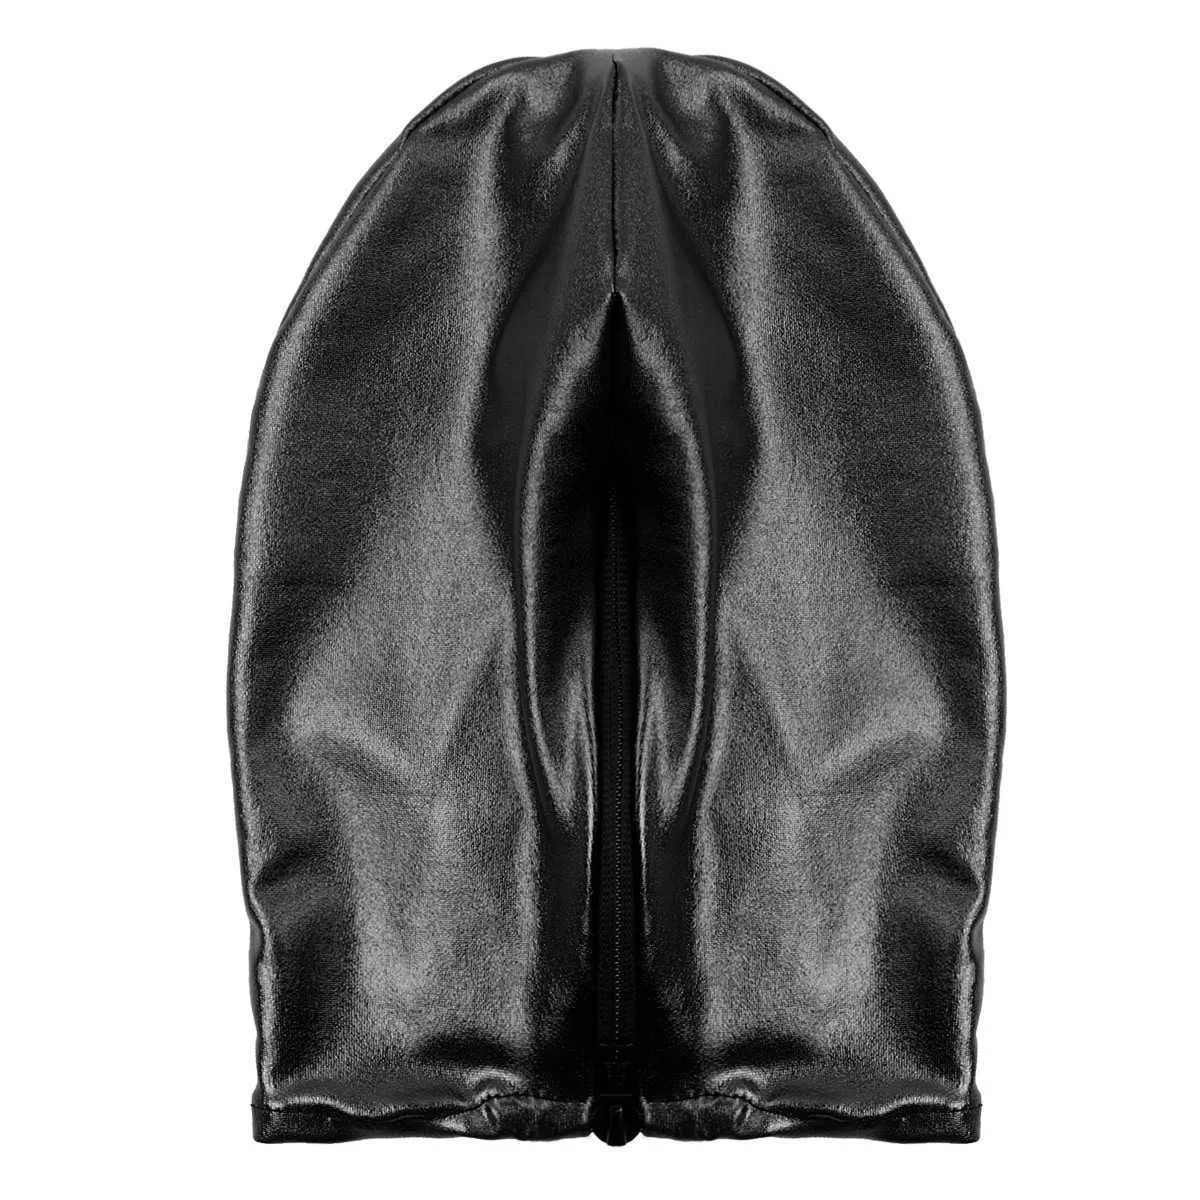 Sexy Unisexe Men Femmes Cosplay Face Mask Hood For Role Play Costume Latex Shiny Metallic Open Mouth Hole Headgear Full Face Mask Q04914516